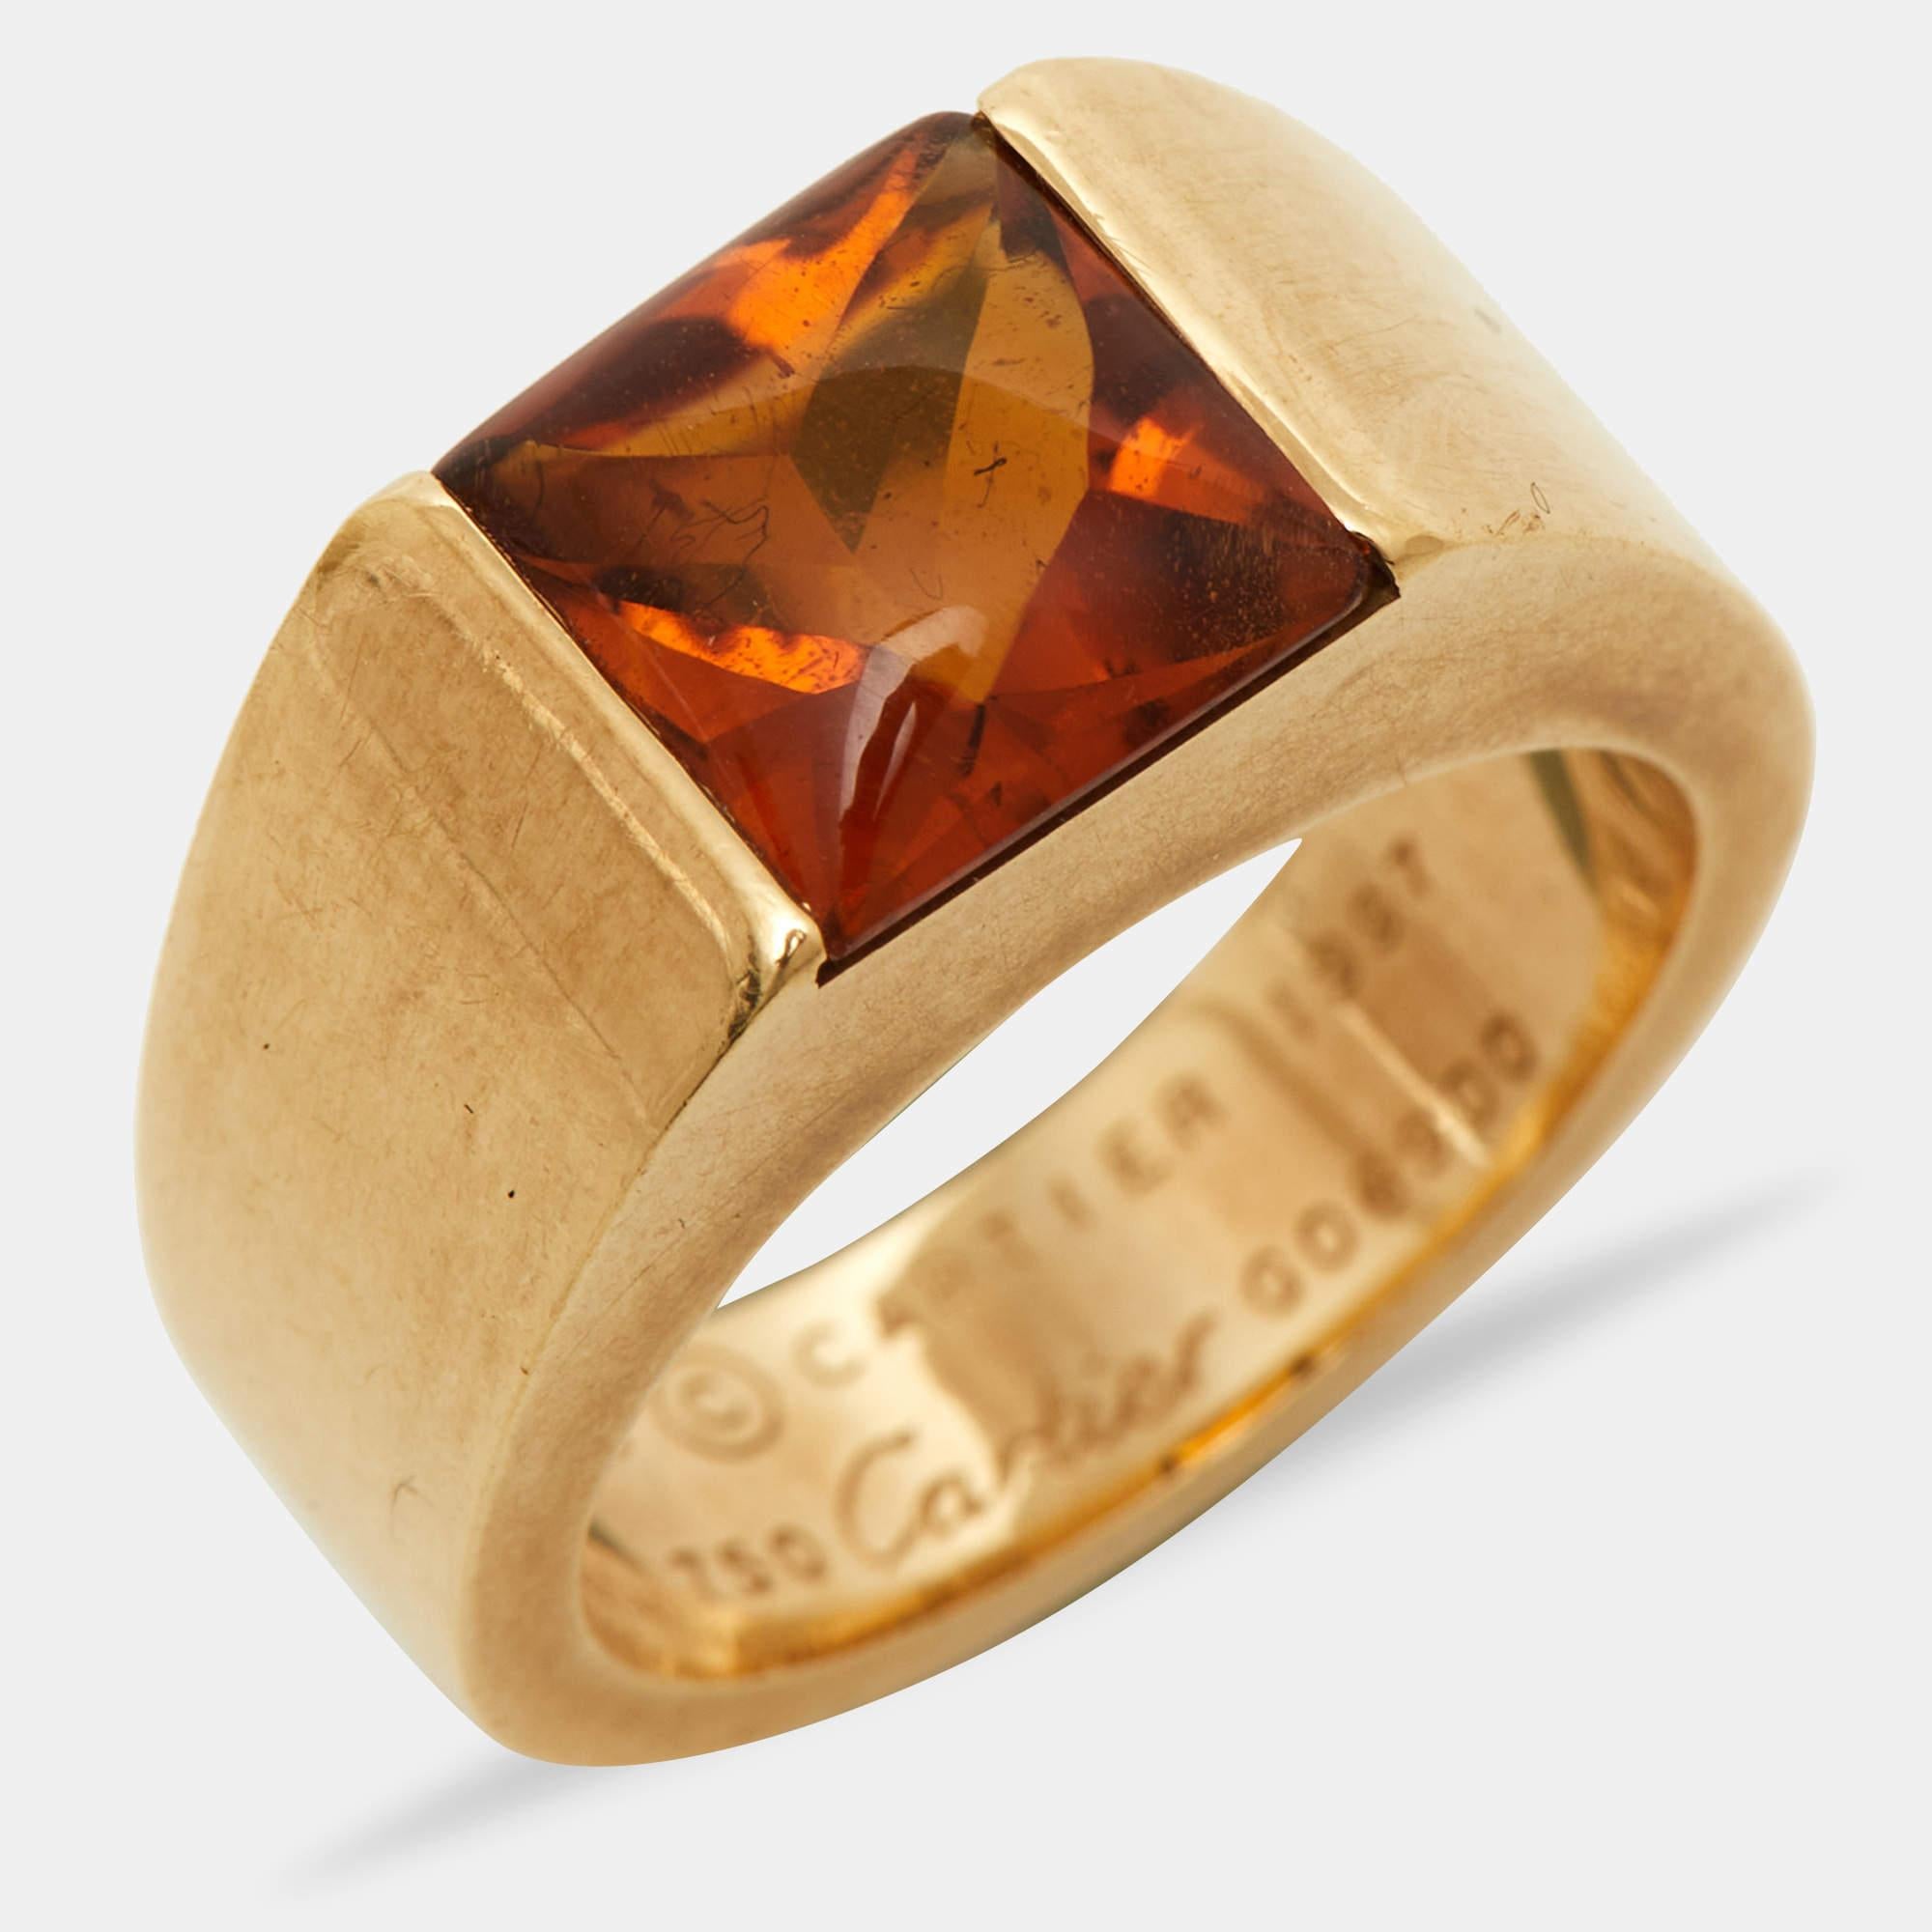 The Cartier Tank Citrine ring is an exquisite jewelry piece. Crafted from luxurious 18k yellow gold, it features a rectangular citrine gemstone with a timeless and elegant tank-inspired design. This ring effortlessly combines classic aesthetics with